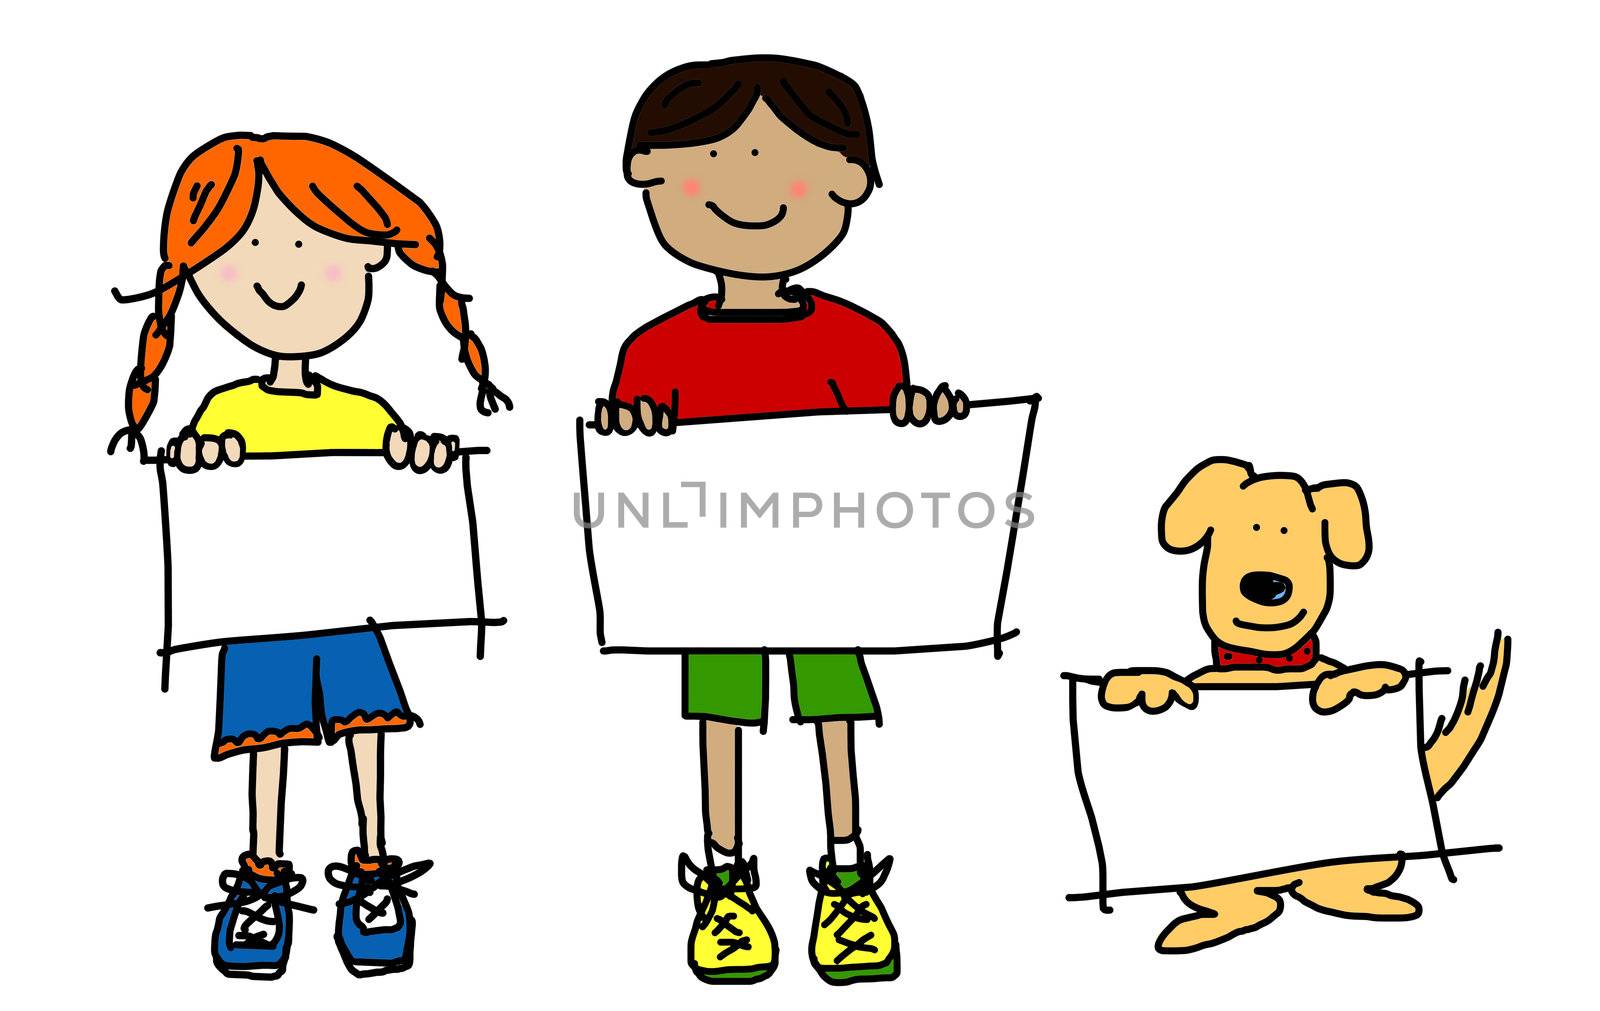 Large cartoon characters: simplisticand colorful line drawings of two smiling kids and their dog holding up blank poster board